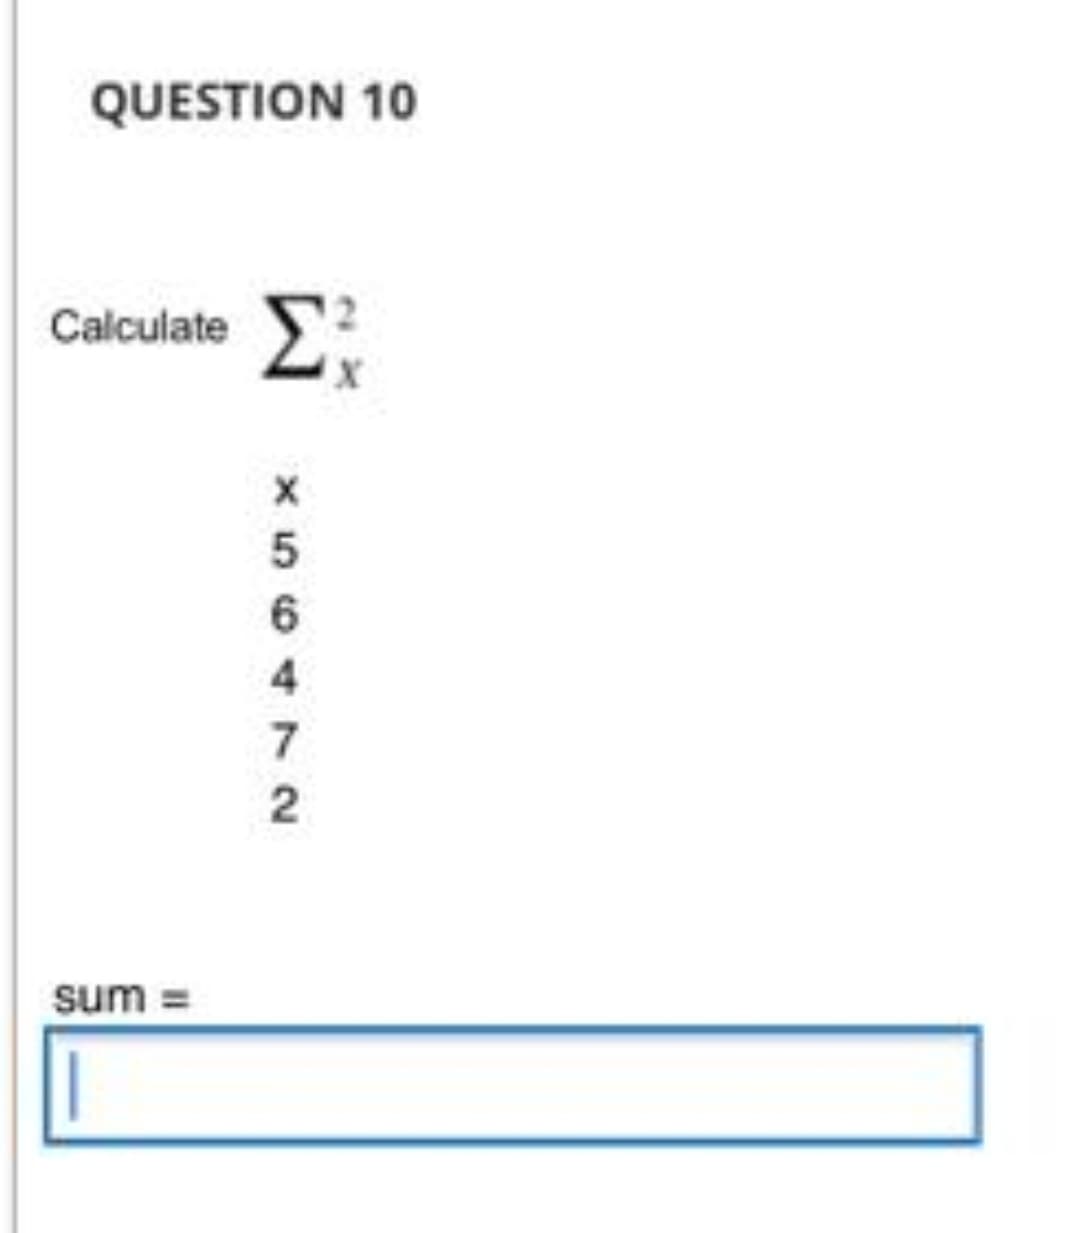 QUESTION 10
calculate Σ
Σ
sum =
|
X
5
6
4
7
2